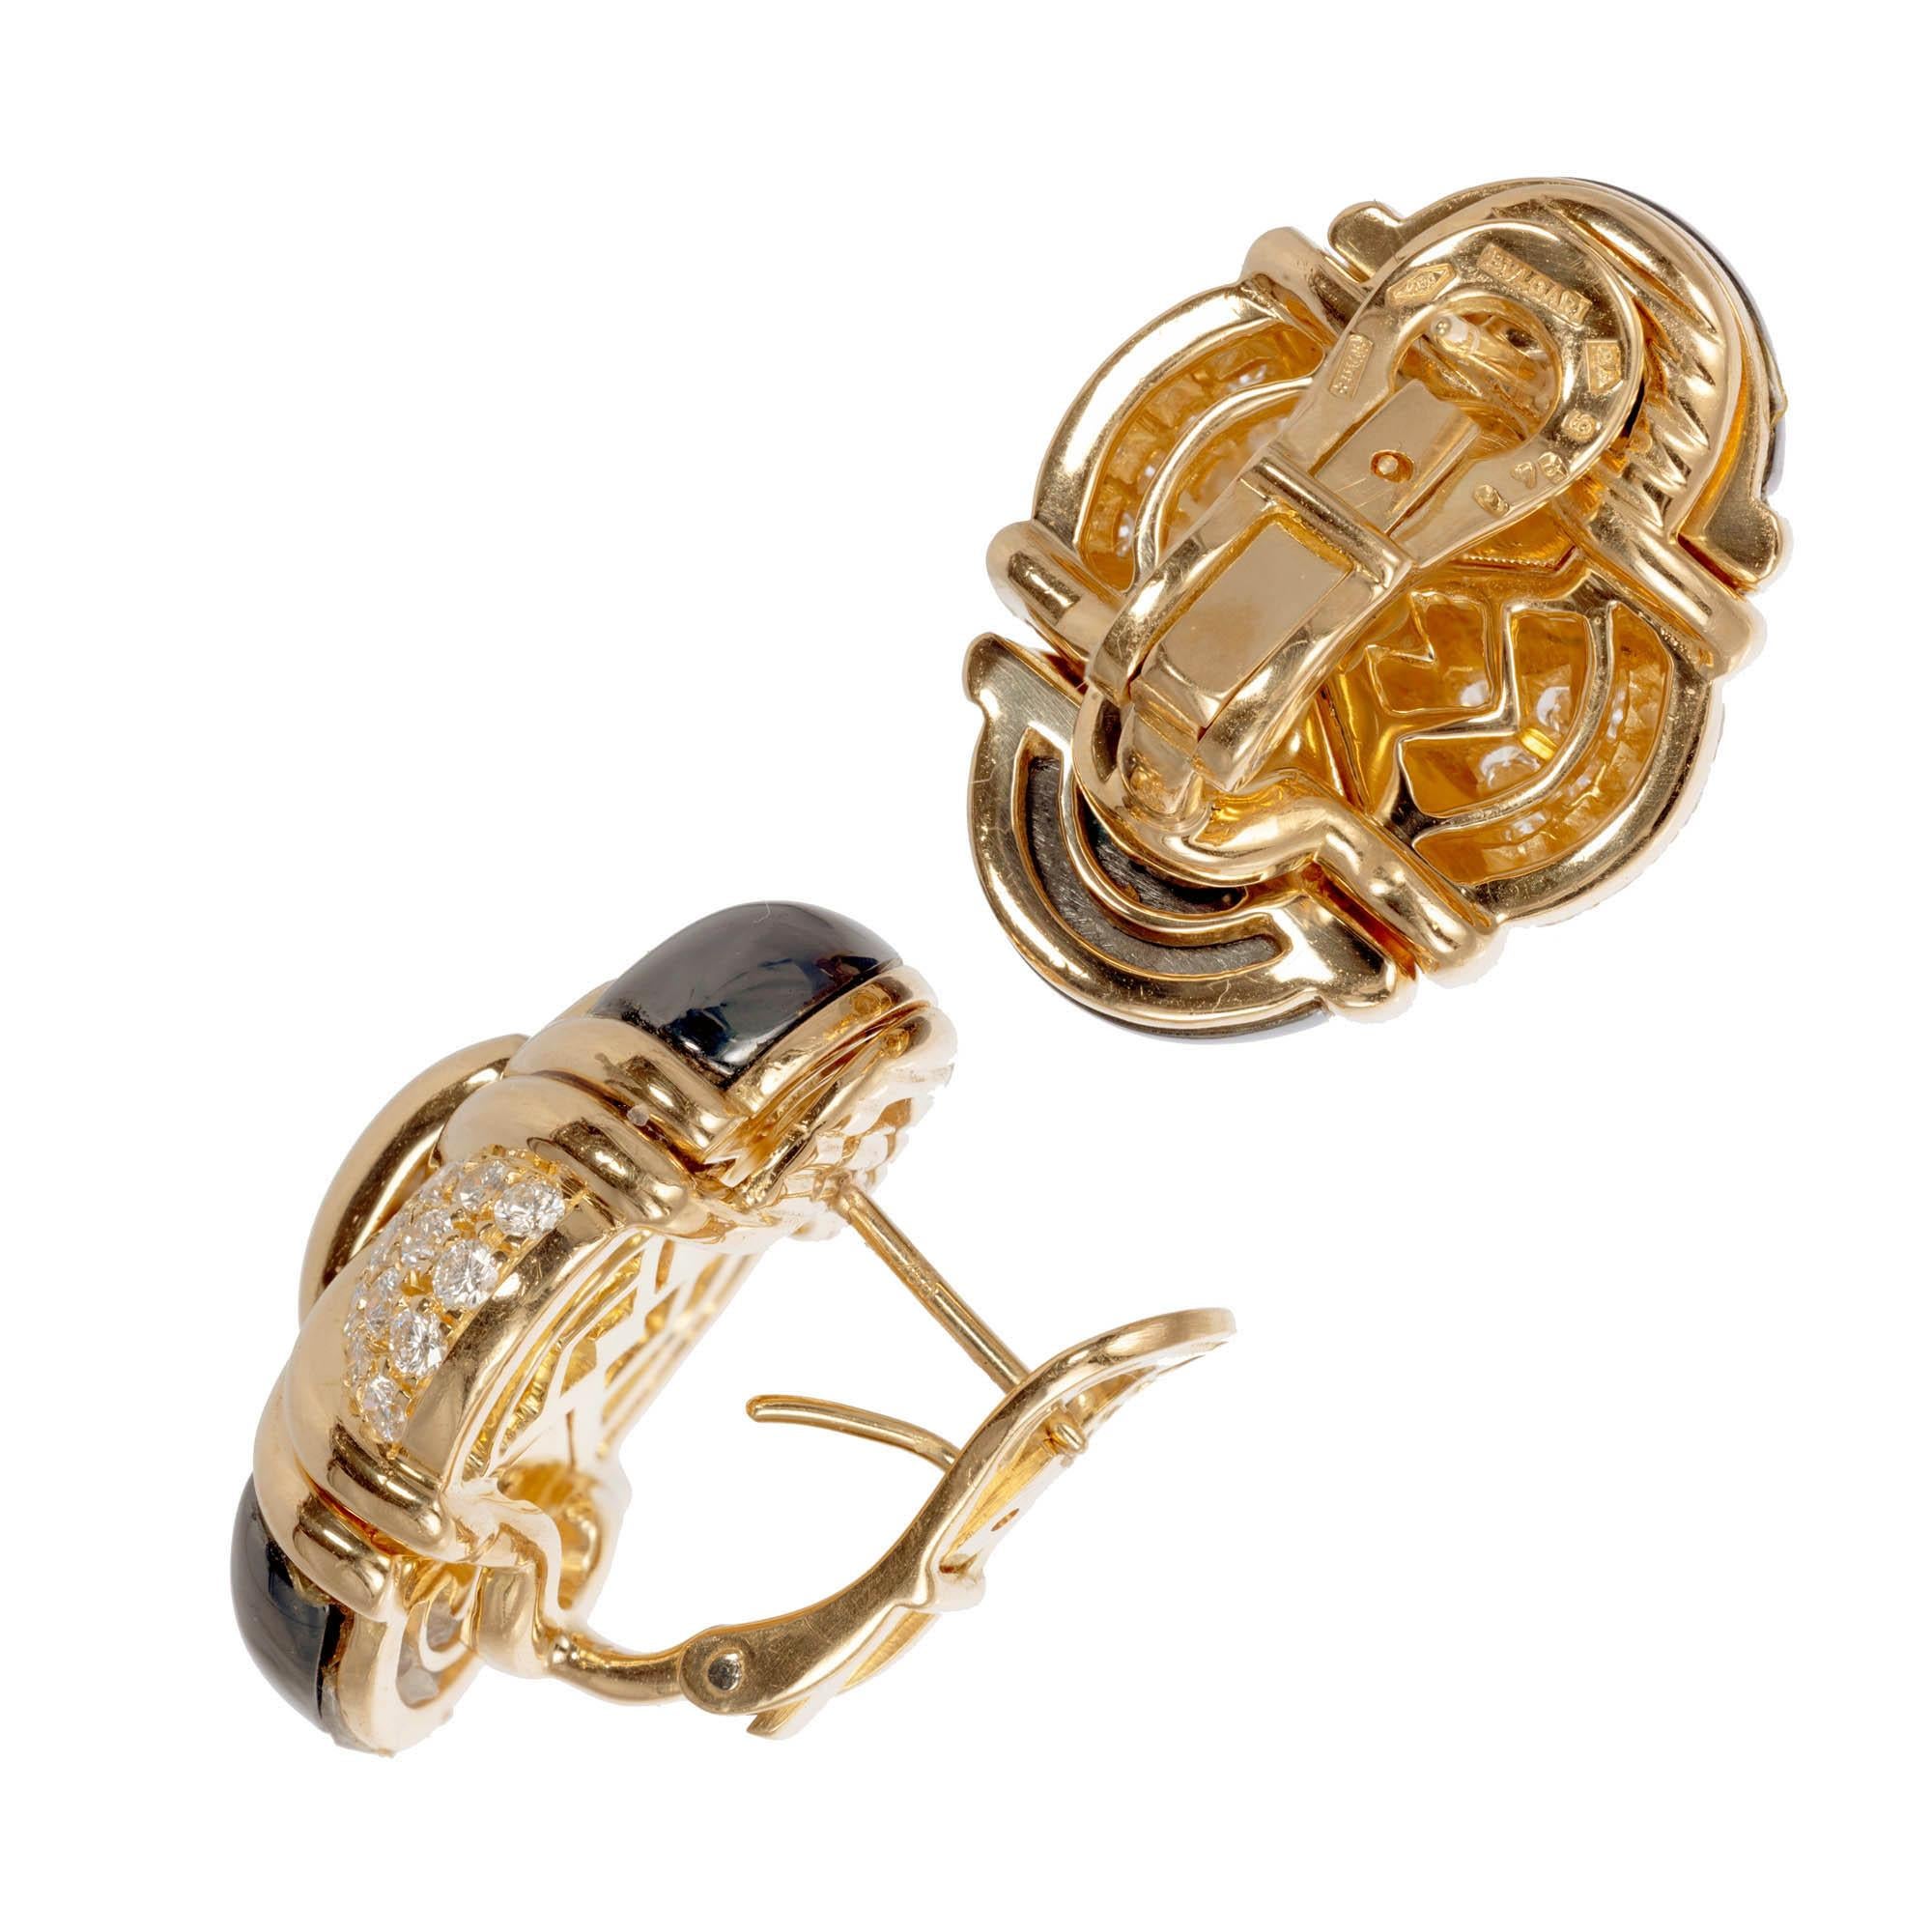 Bvlgari hematite and diamond solid 18k yellow gold clip post earrings.

56 round brilliant cut F-G WS diamonds Approximate 1.60 carats 
4 hematite
14k yellow gold 
Stamped: 750
Hallmark: Bvlgari
43.9 Grams
Top to Bottom: 25.86mm or 1.00